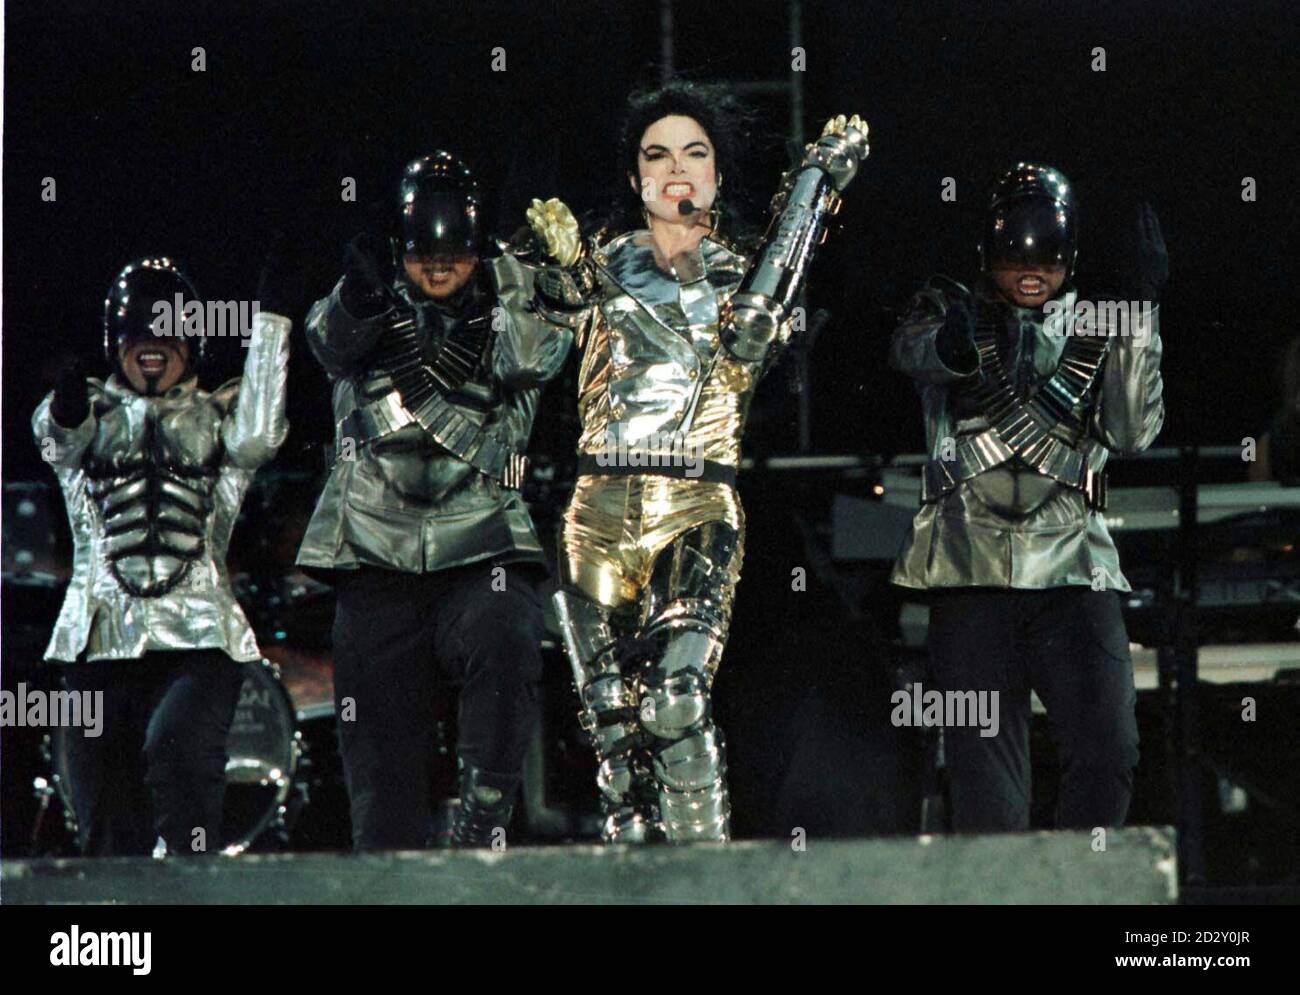 FOR EDITORIAL USE ONLY IN CONNECTION WITH COVERAGE OF TONIGHT'S CONCERT (ONE USE ONLY) : American super star Michael Jackson on stage at the Don Valley Stadium, Sheffield, during the first of his concerts this evening (Wednesday). Photo by Owen Humphreys/PA. Stock Photo